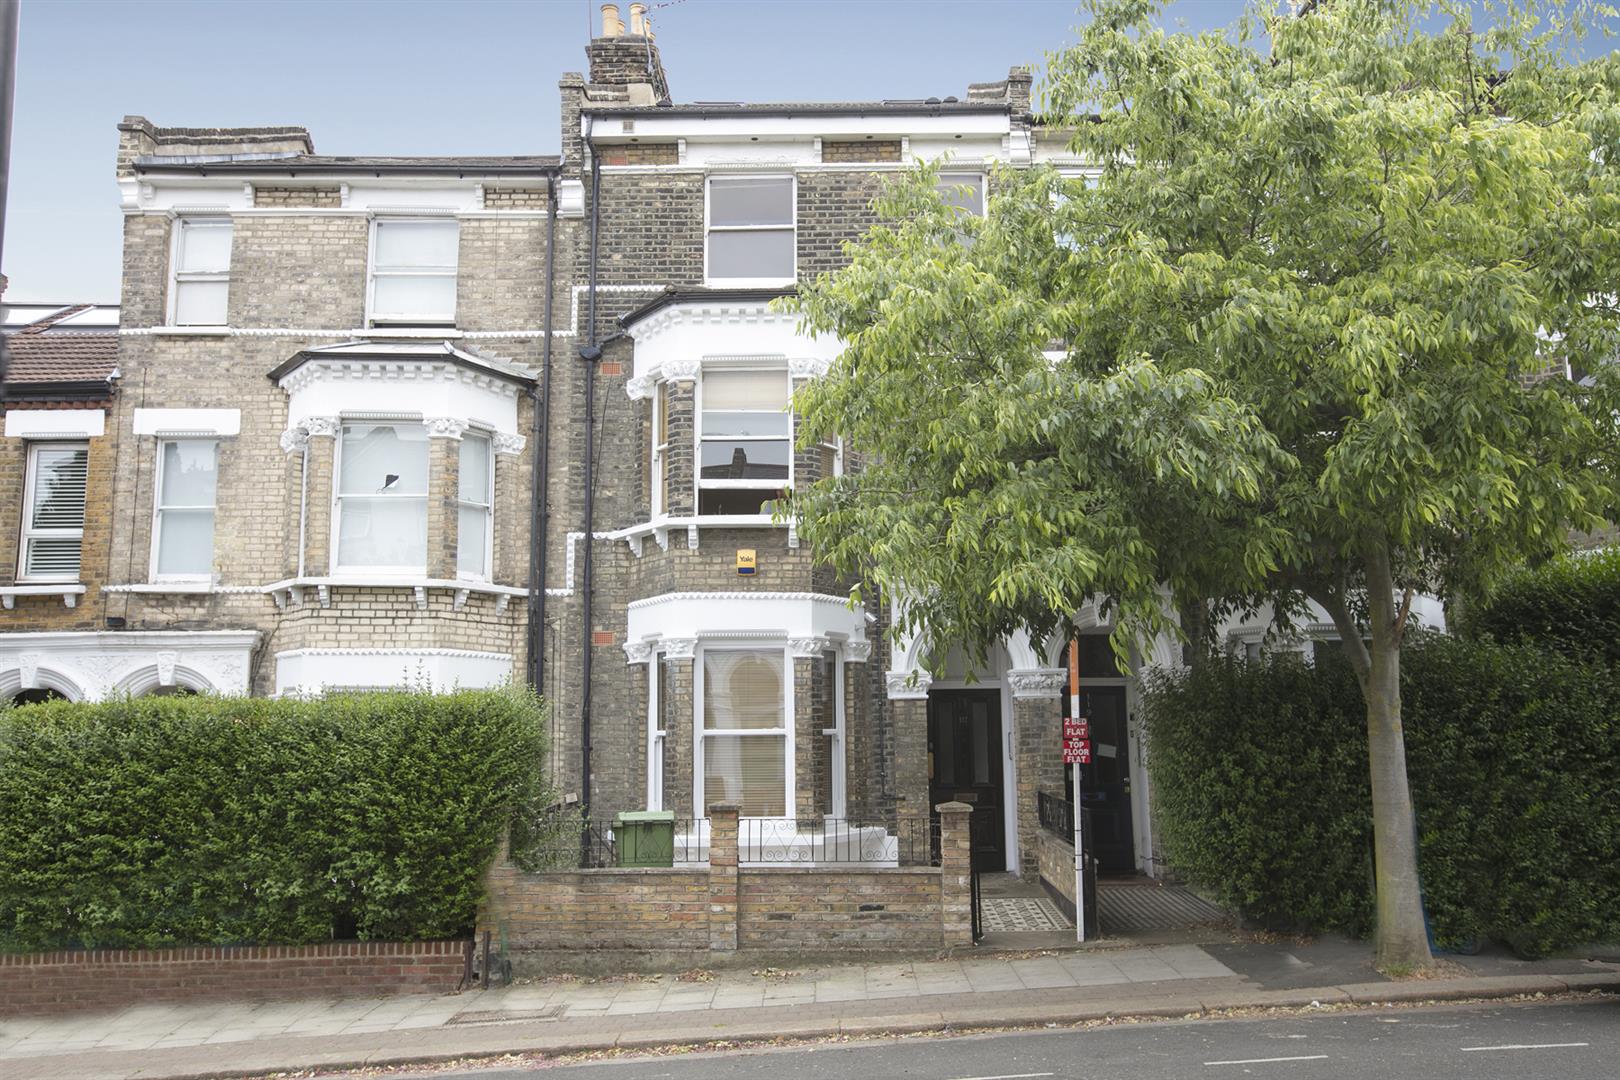 Flat - Conversion For Sale in Shenley Road, Camberwell, SE5 874 view1